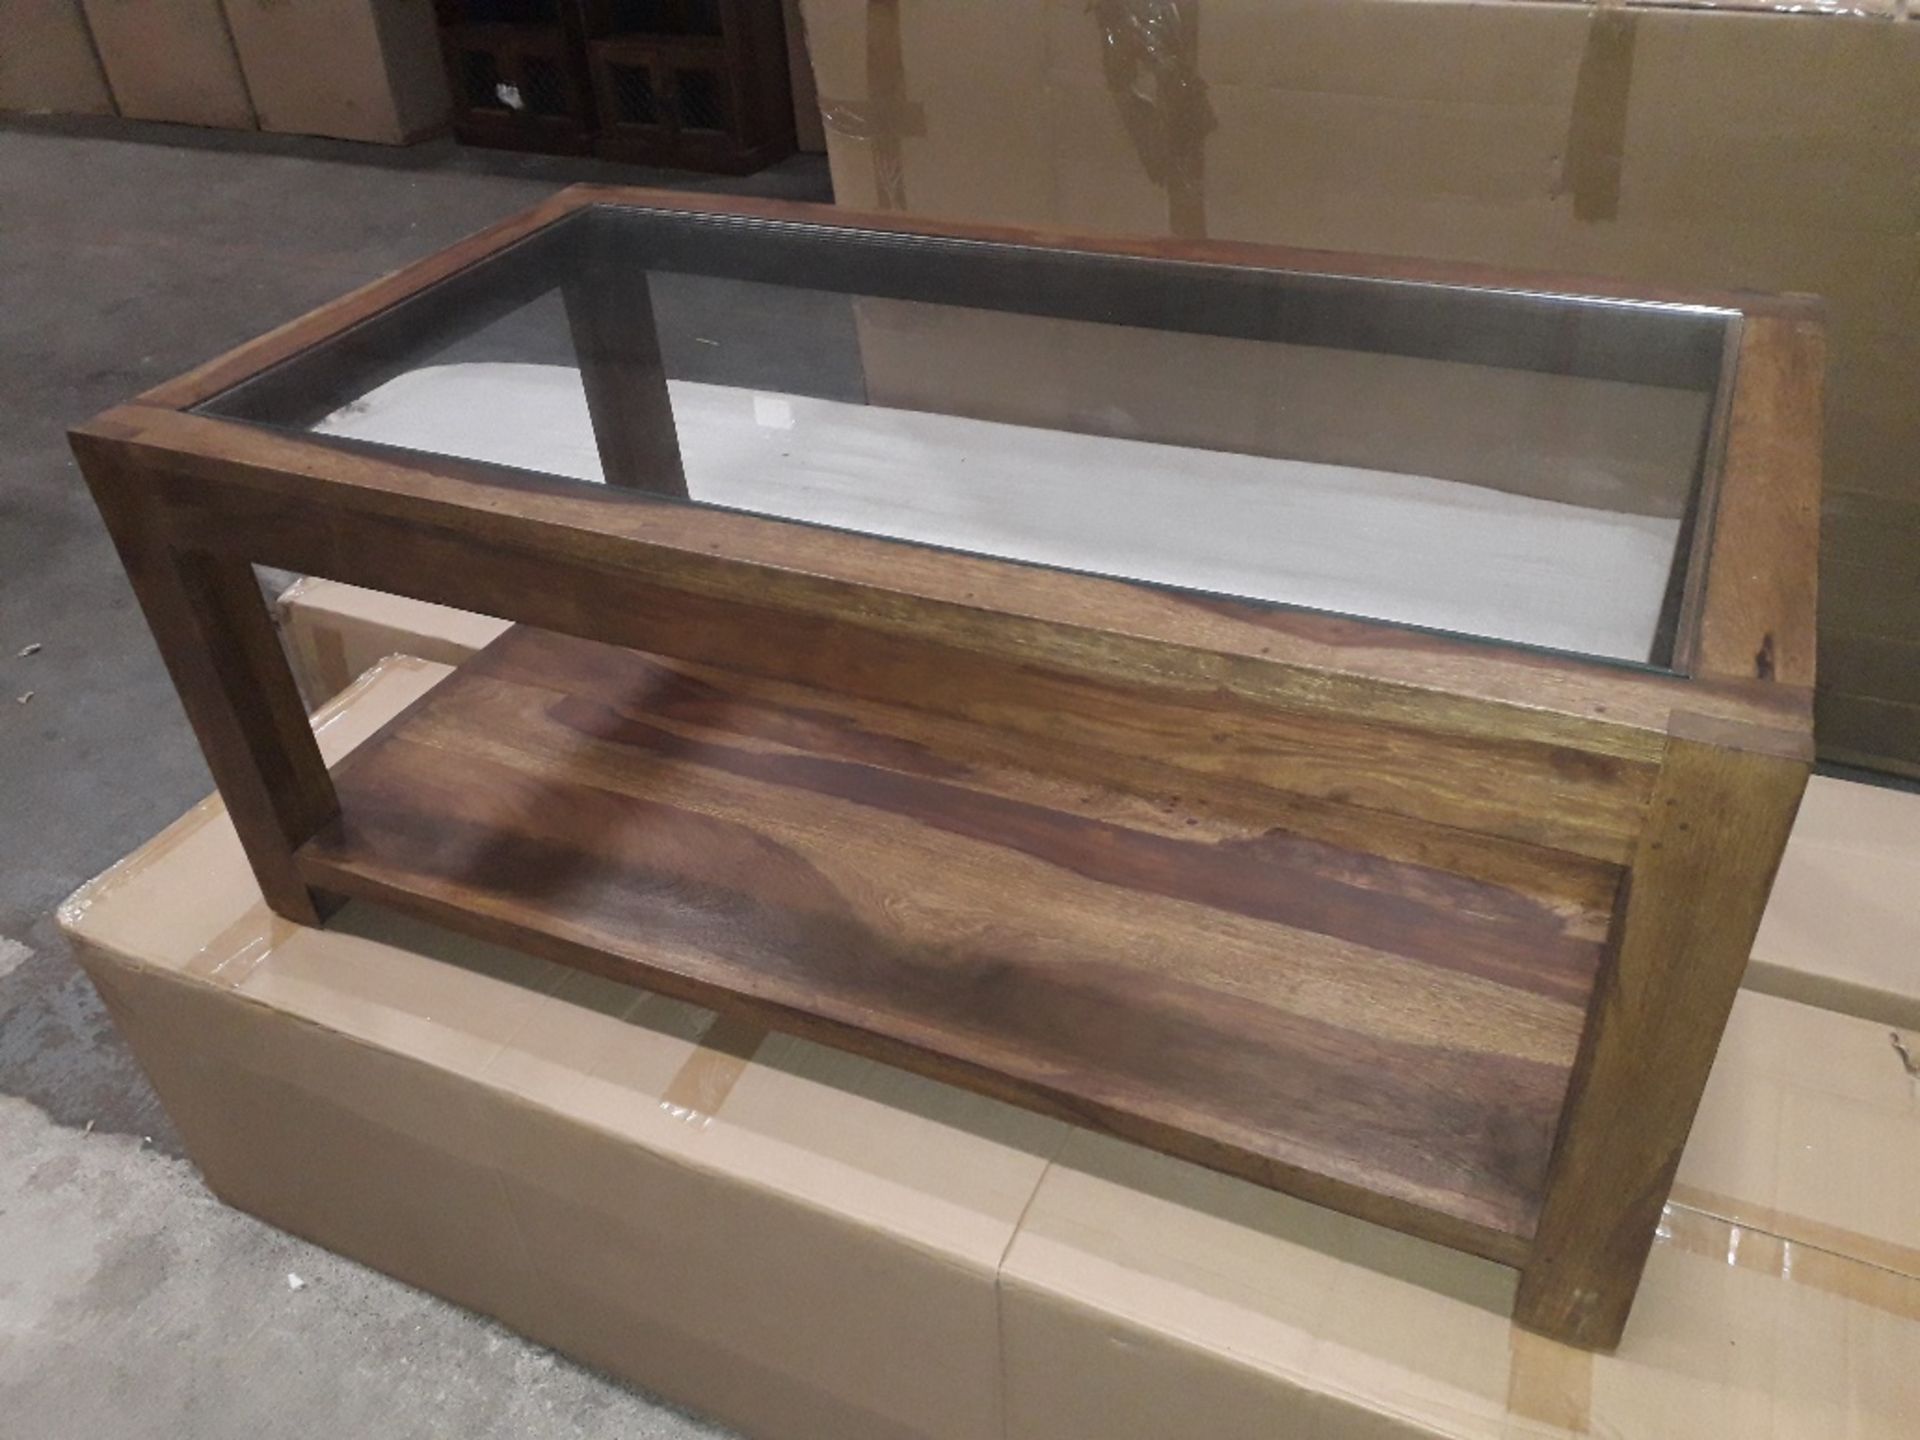 1 X BRAND NEW WOODEN COFFEE TABLE WITH GLASS TOP - 1000X500X500MM - IN BOX